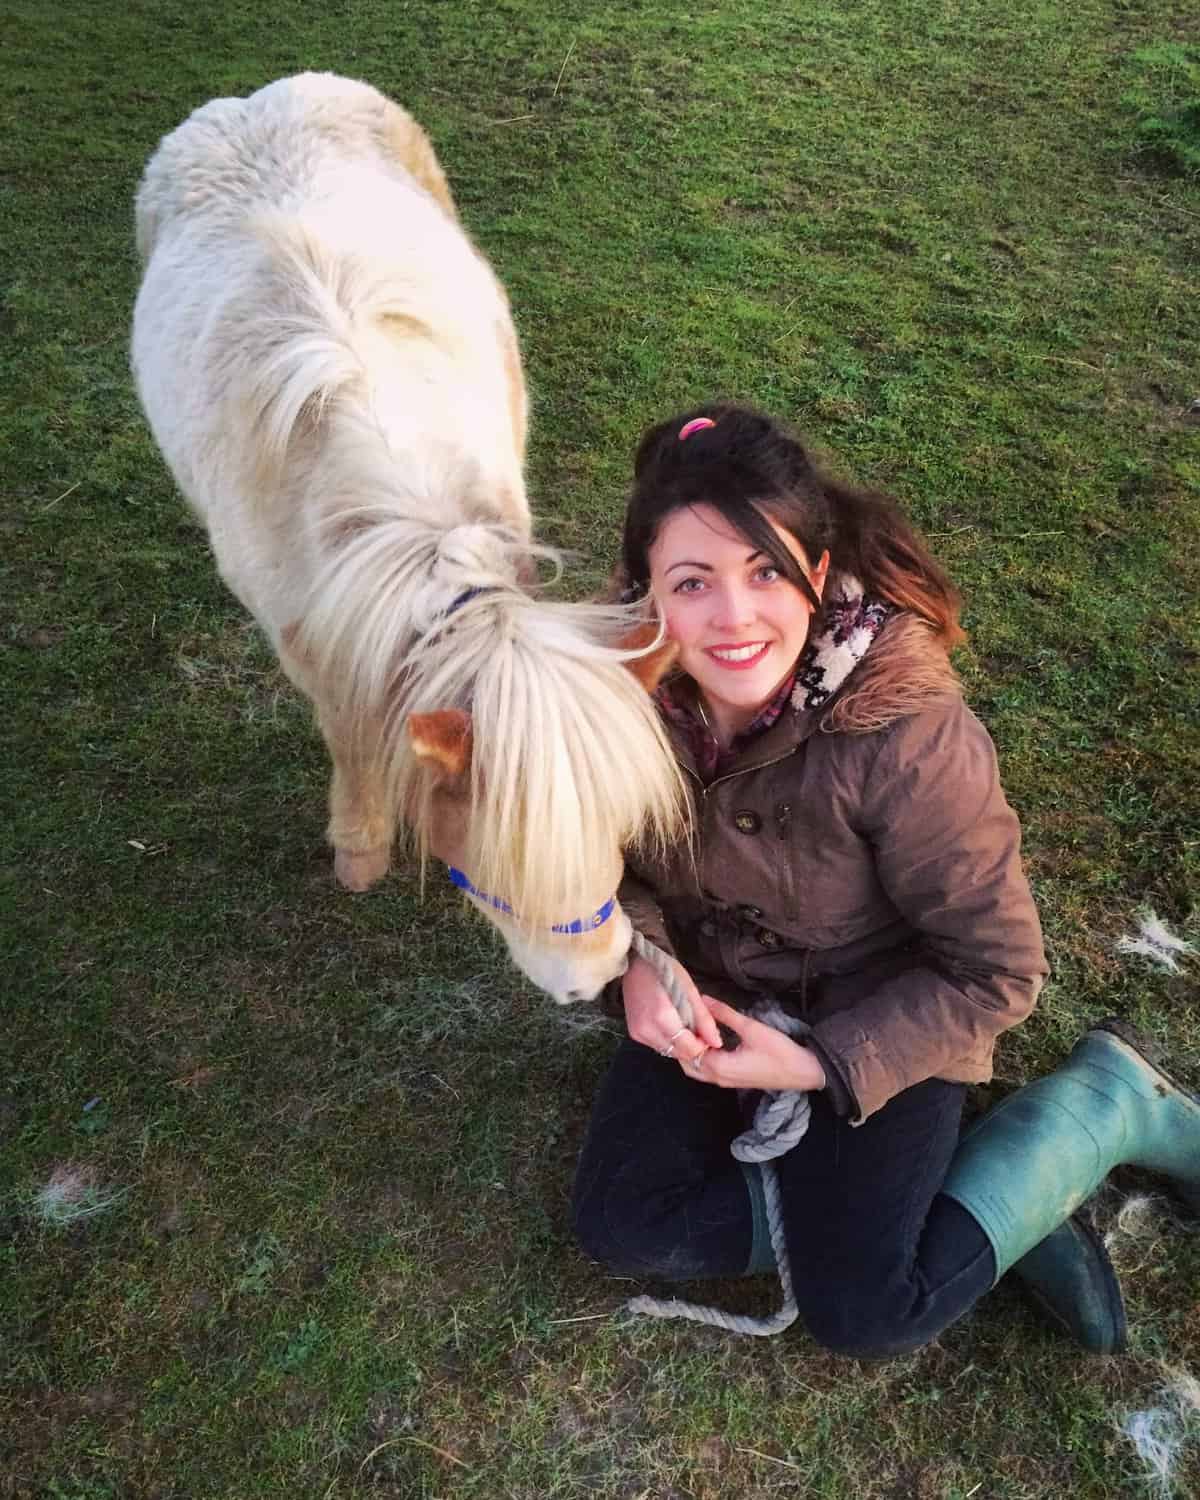 Sitting with Diesel, our other miniature horse to show how small he is!